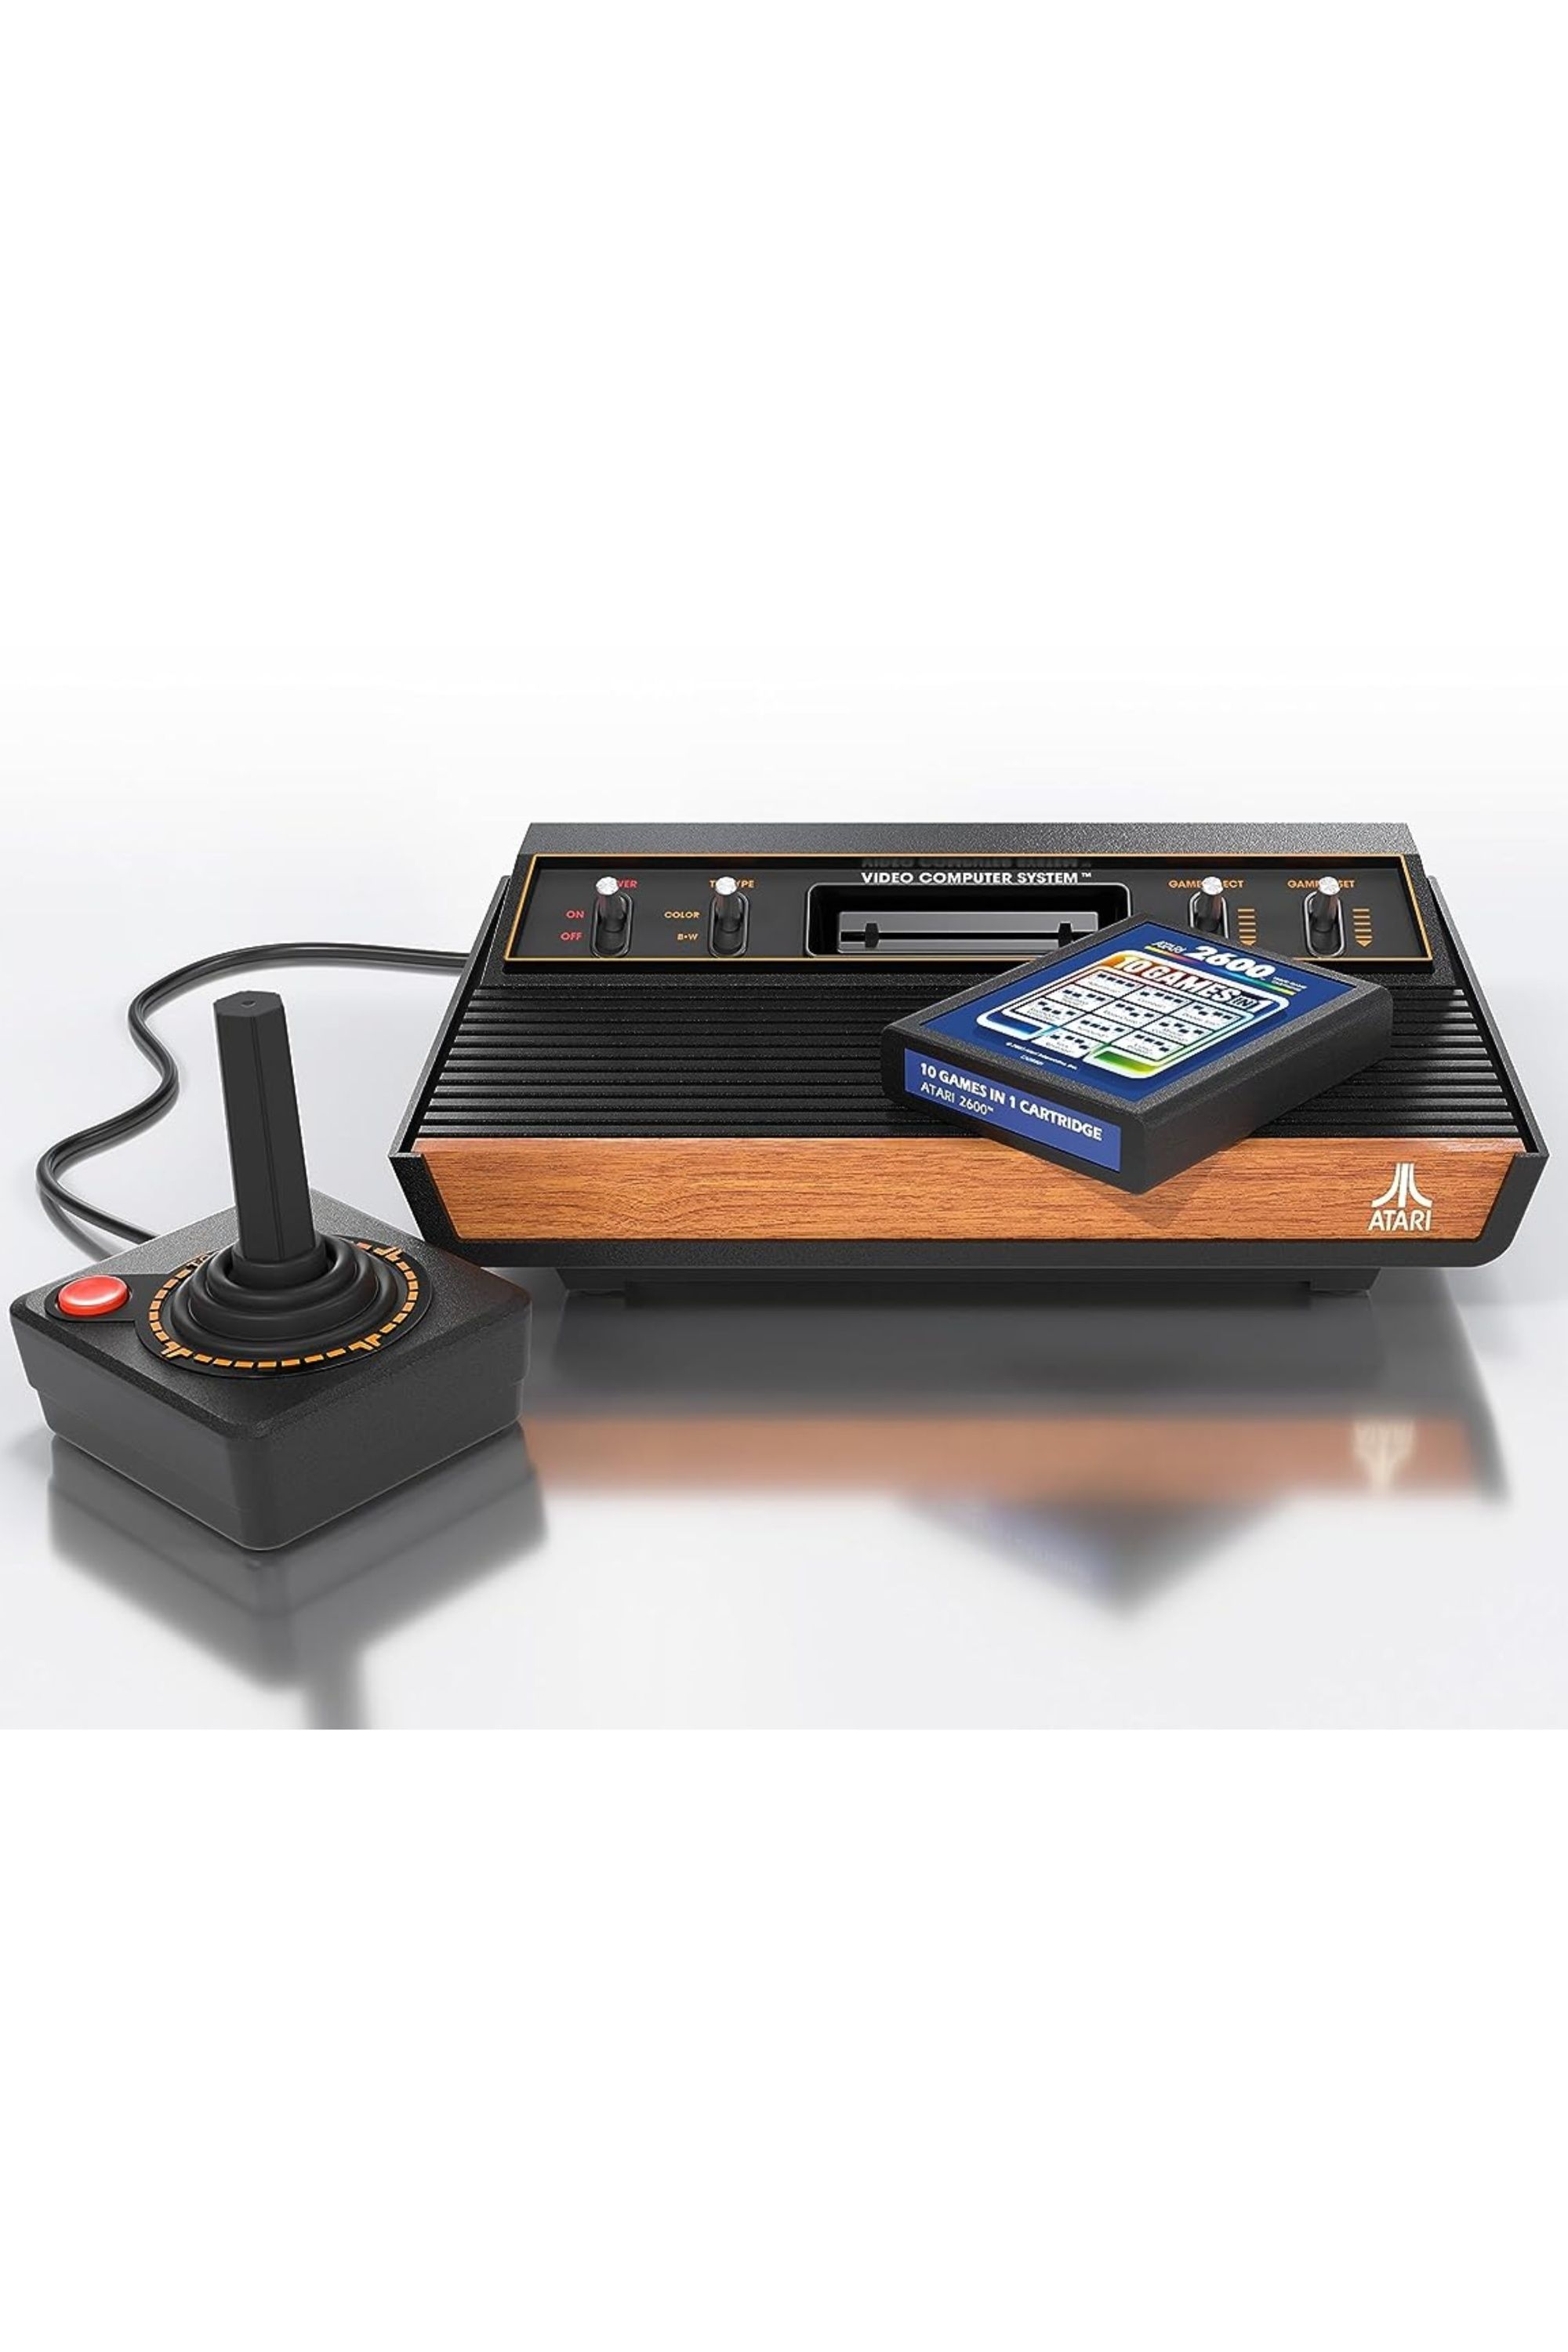 Atari 2600+ release date, pre-order, features and latest news